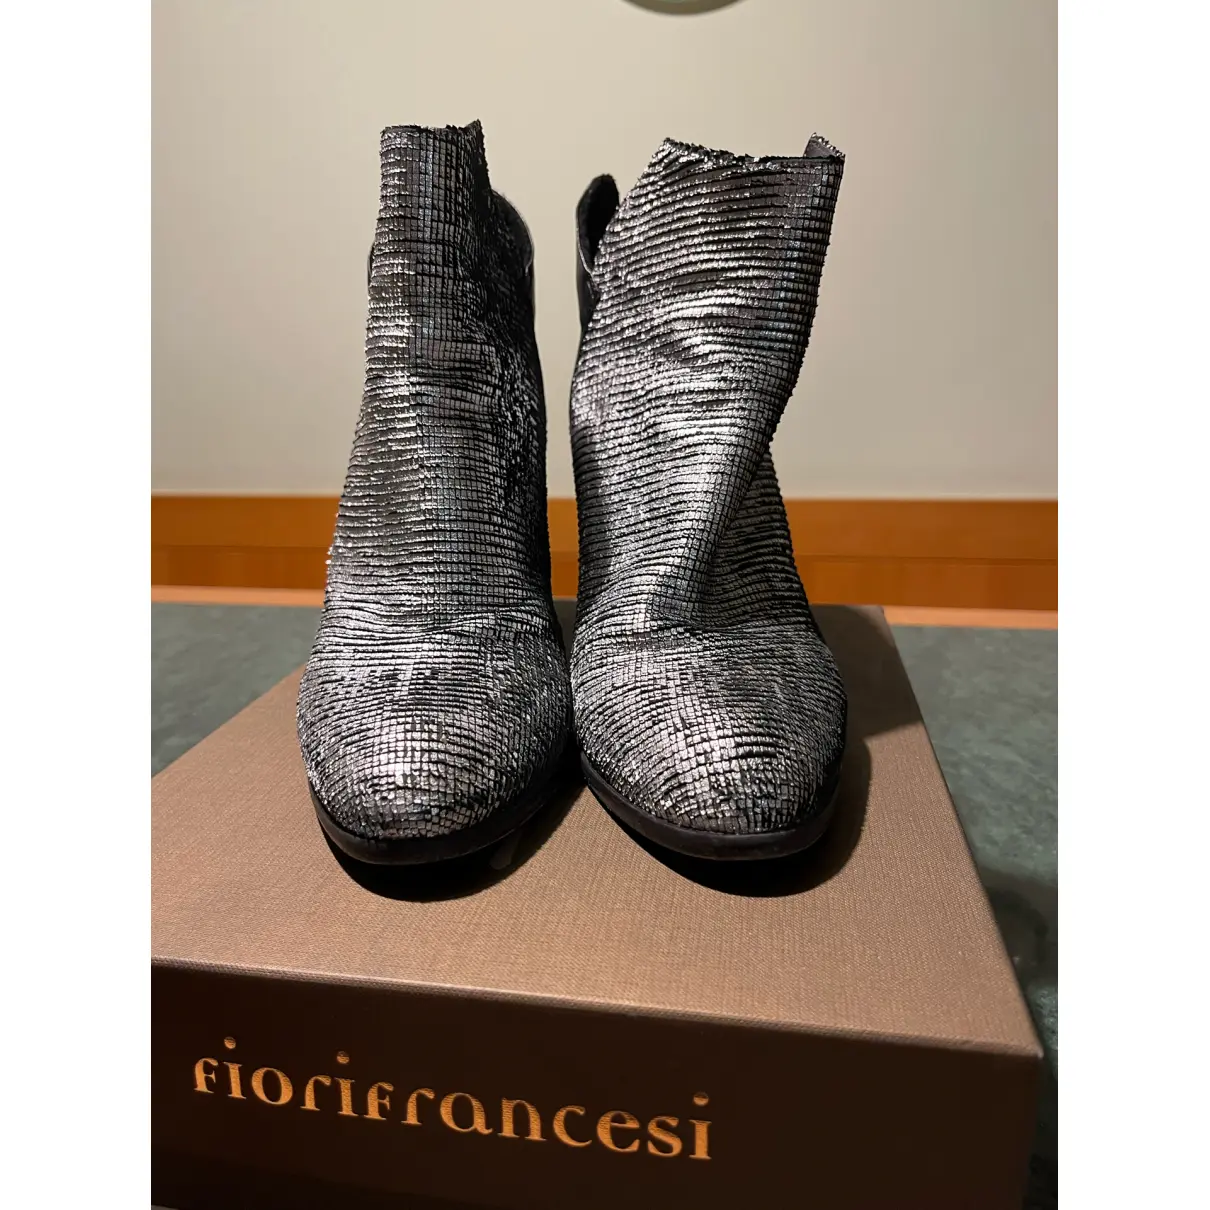 Buy Fiorifrancesi Leather boots online